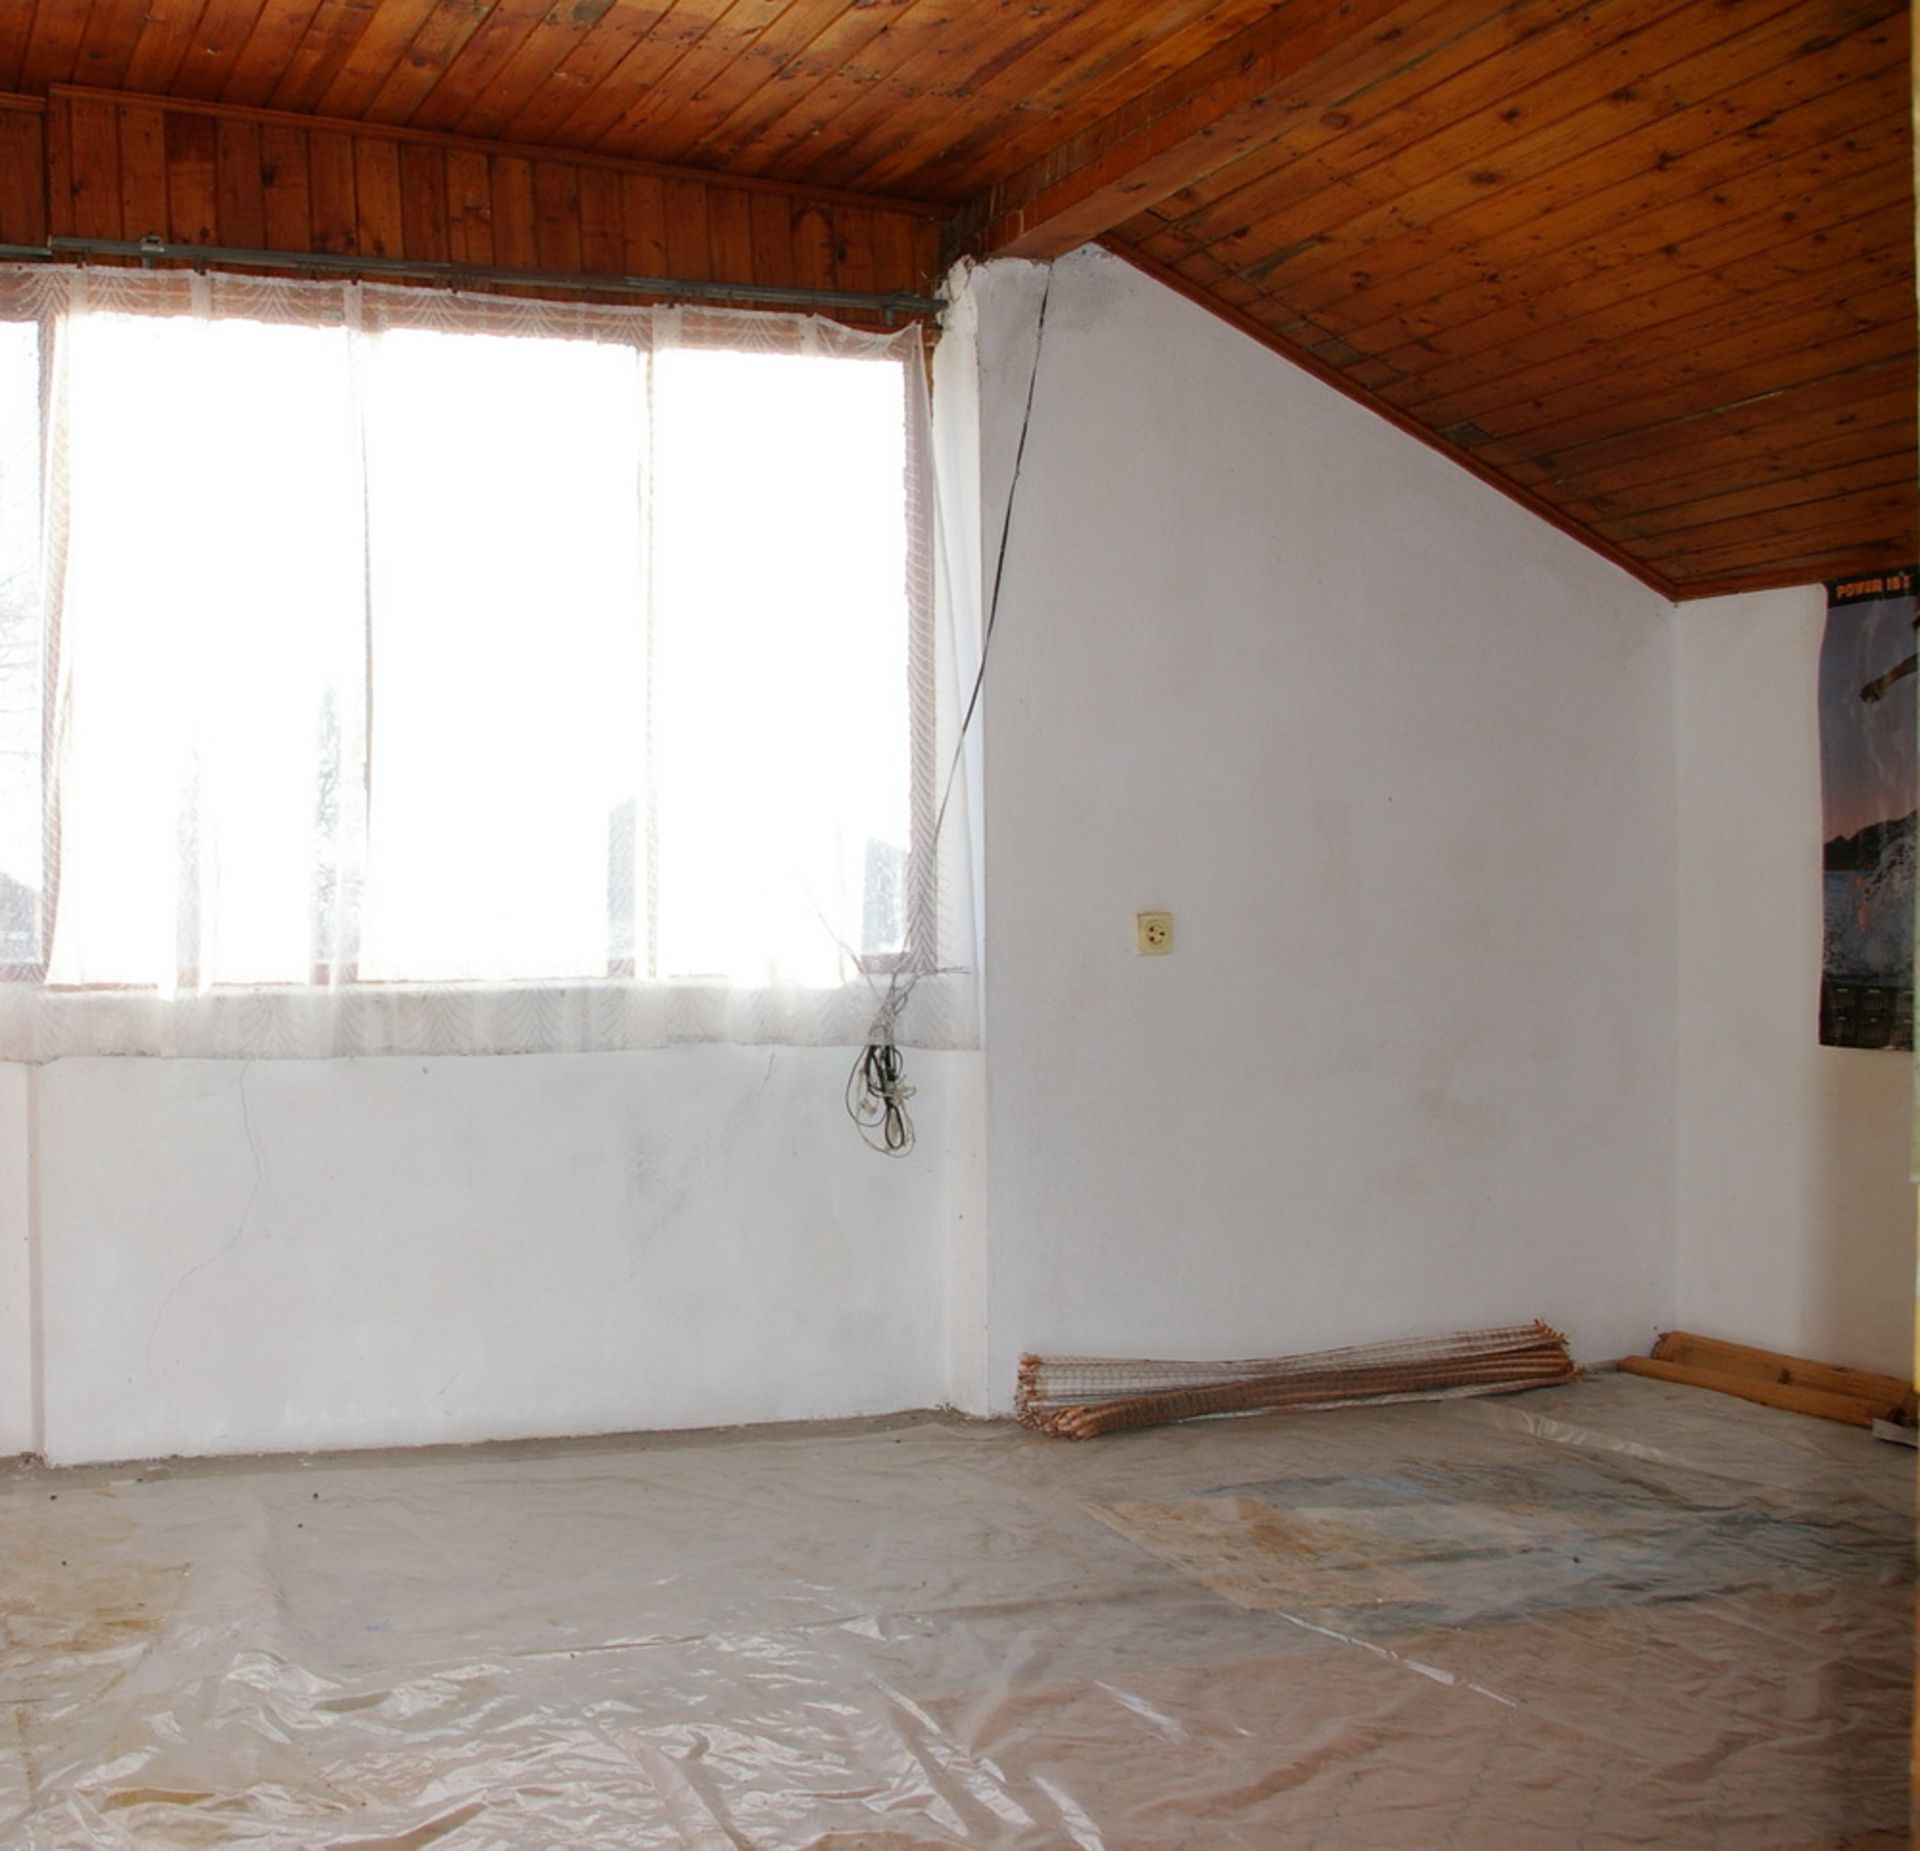 SIX ROOM VILLA AND 1,850 SQM OF LAND IN BULGARIA - Image 19 of 24